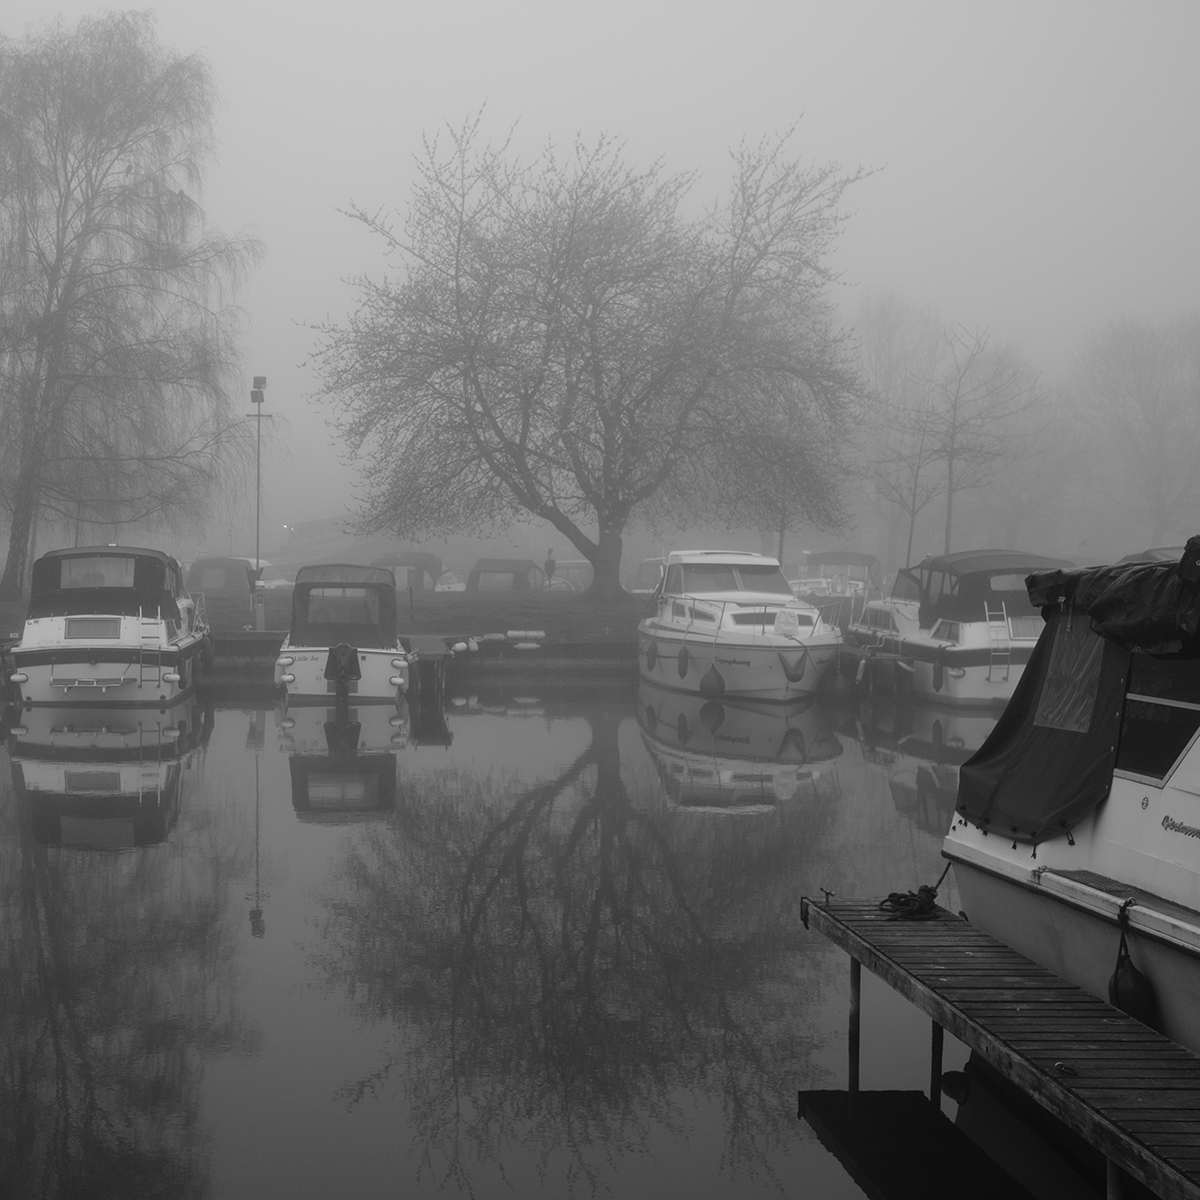 Marina Boats in the Mist I link image